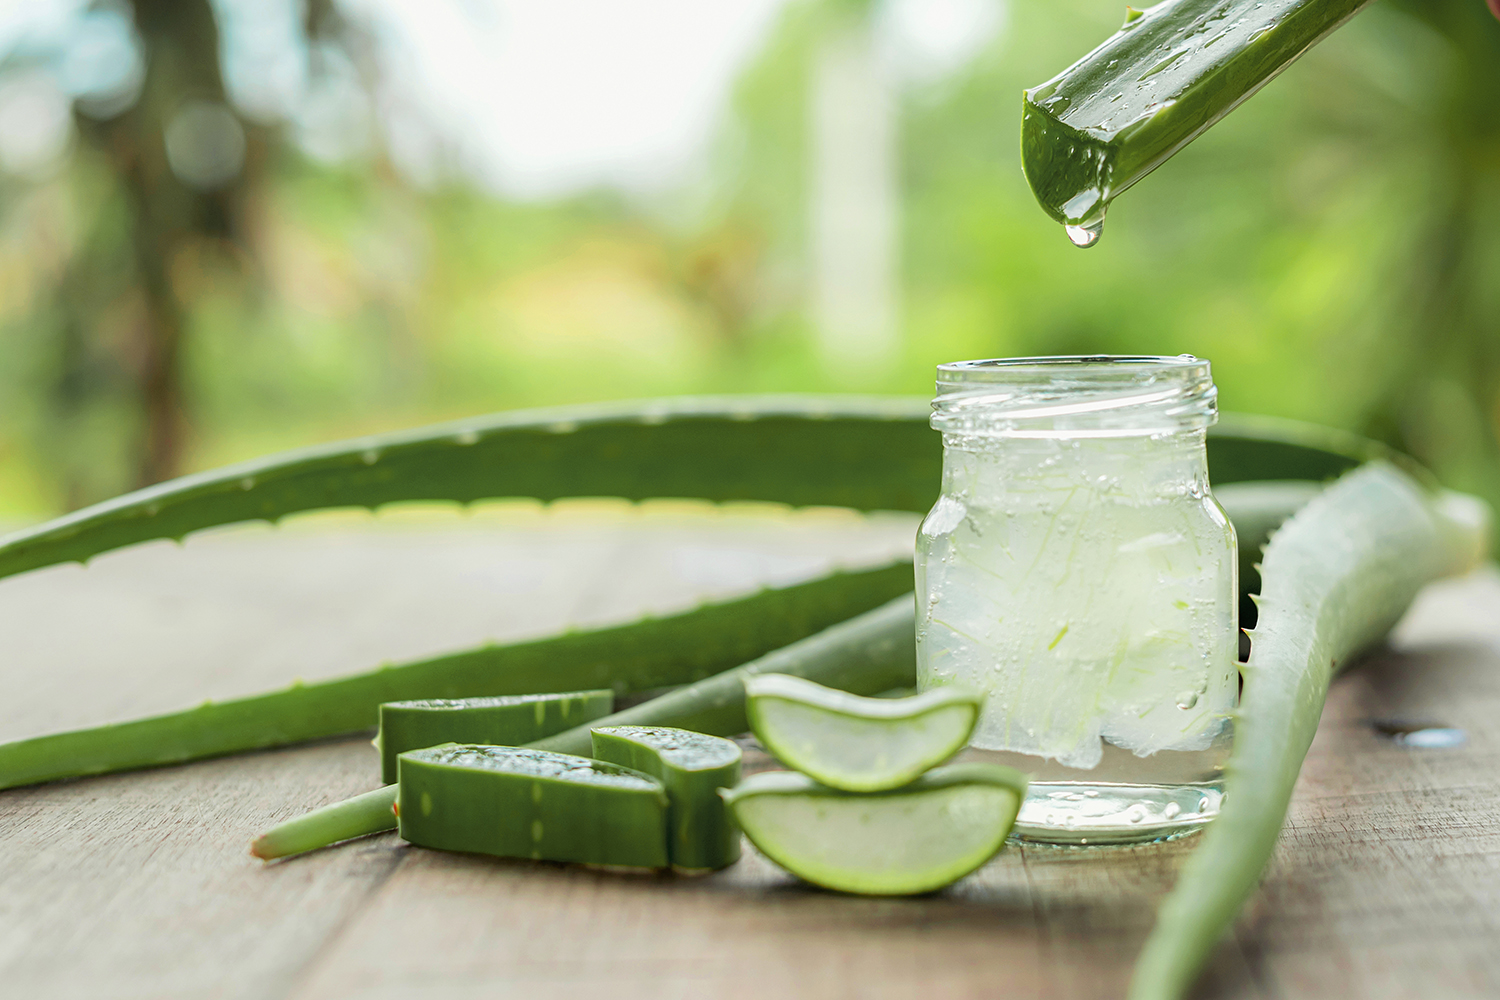 ALOE VERA: AN OLD PLANT FOR NEW HEALTH